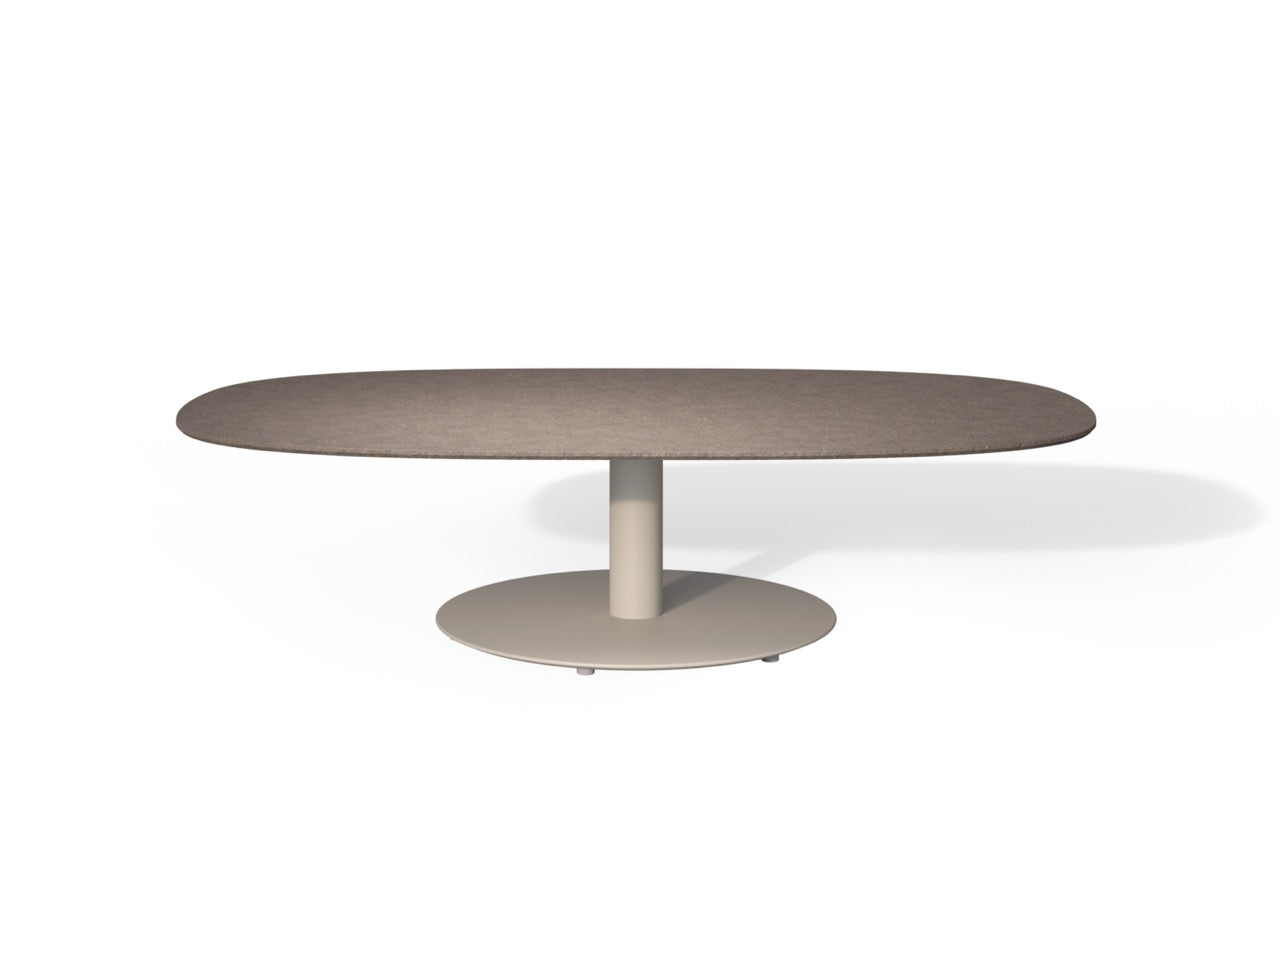 Tribù T-TABLE oval coffee table 136 cm